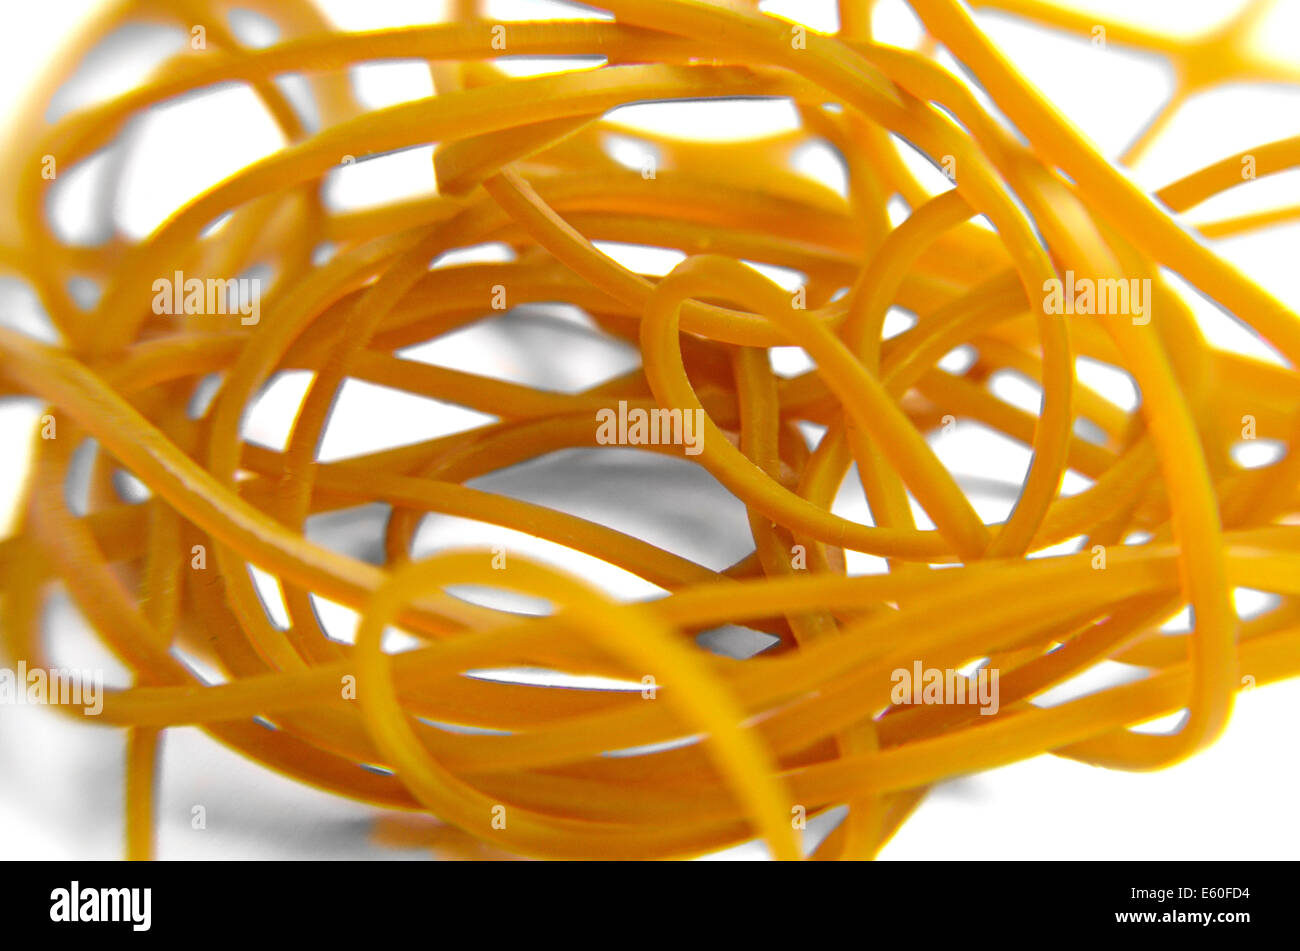 Yellow Rubber Bands Isolated On The White Background Stock Photo